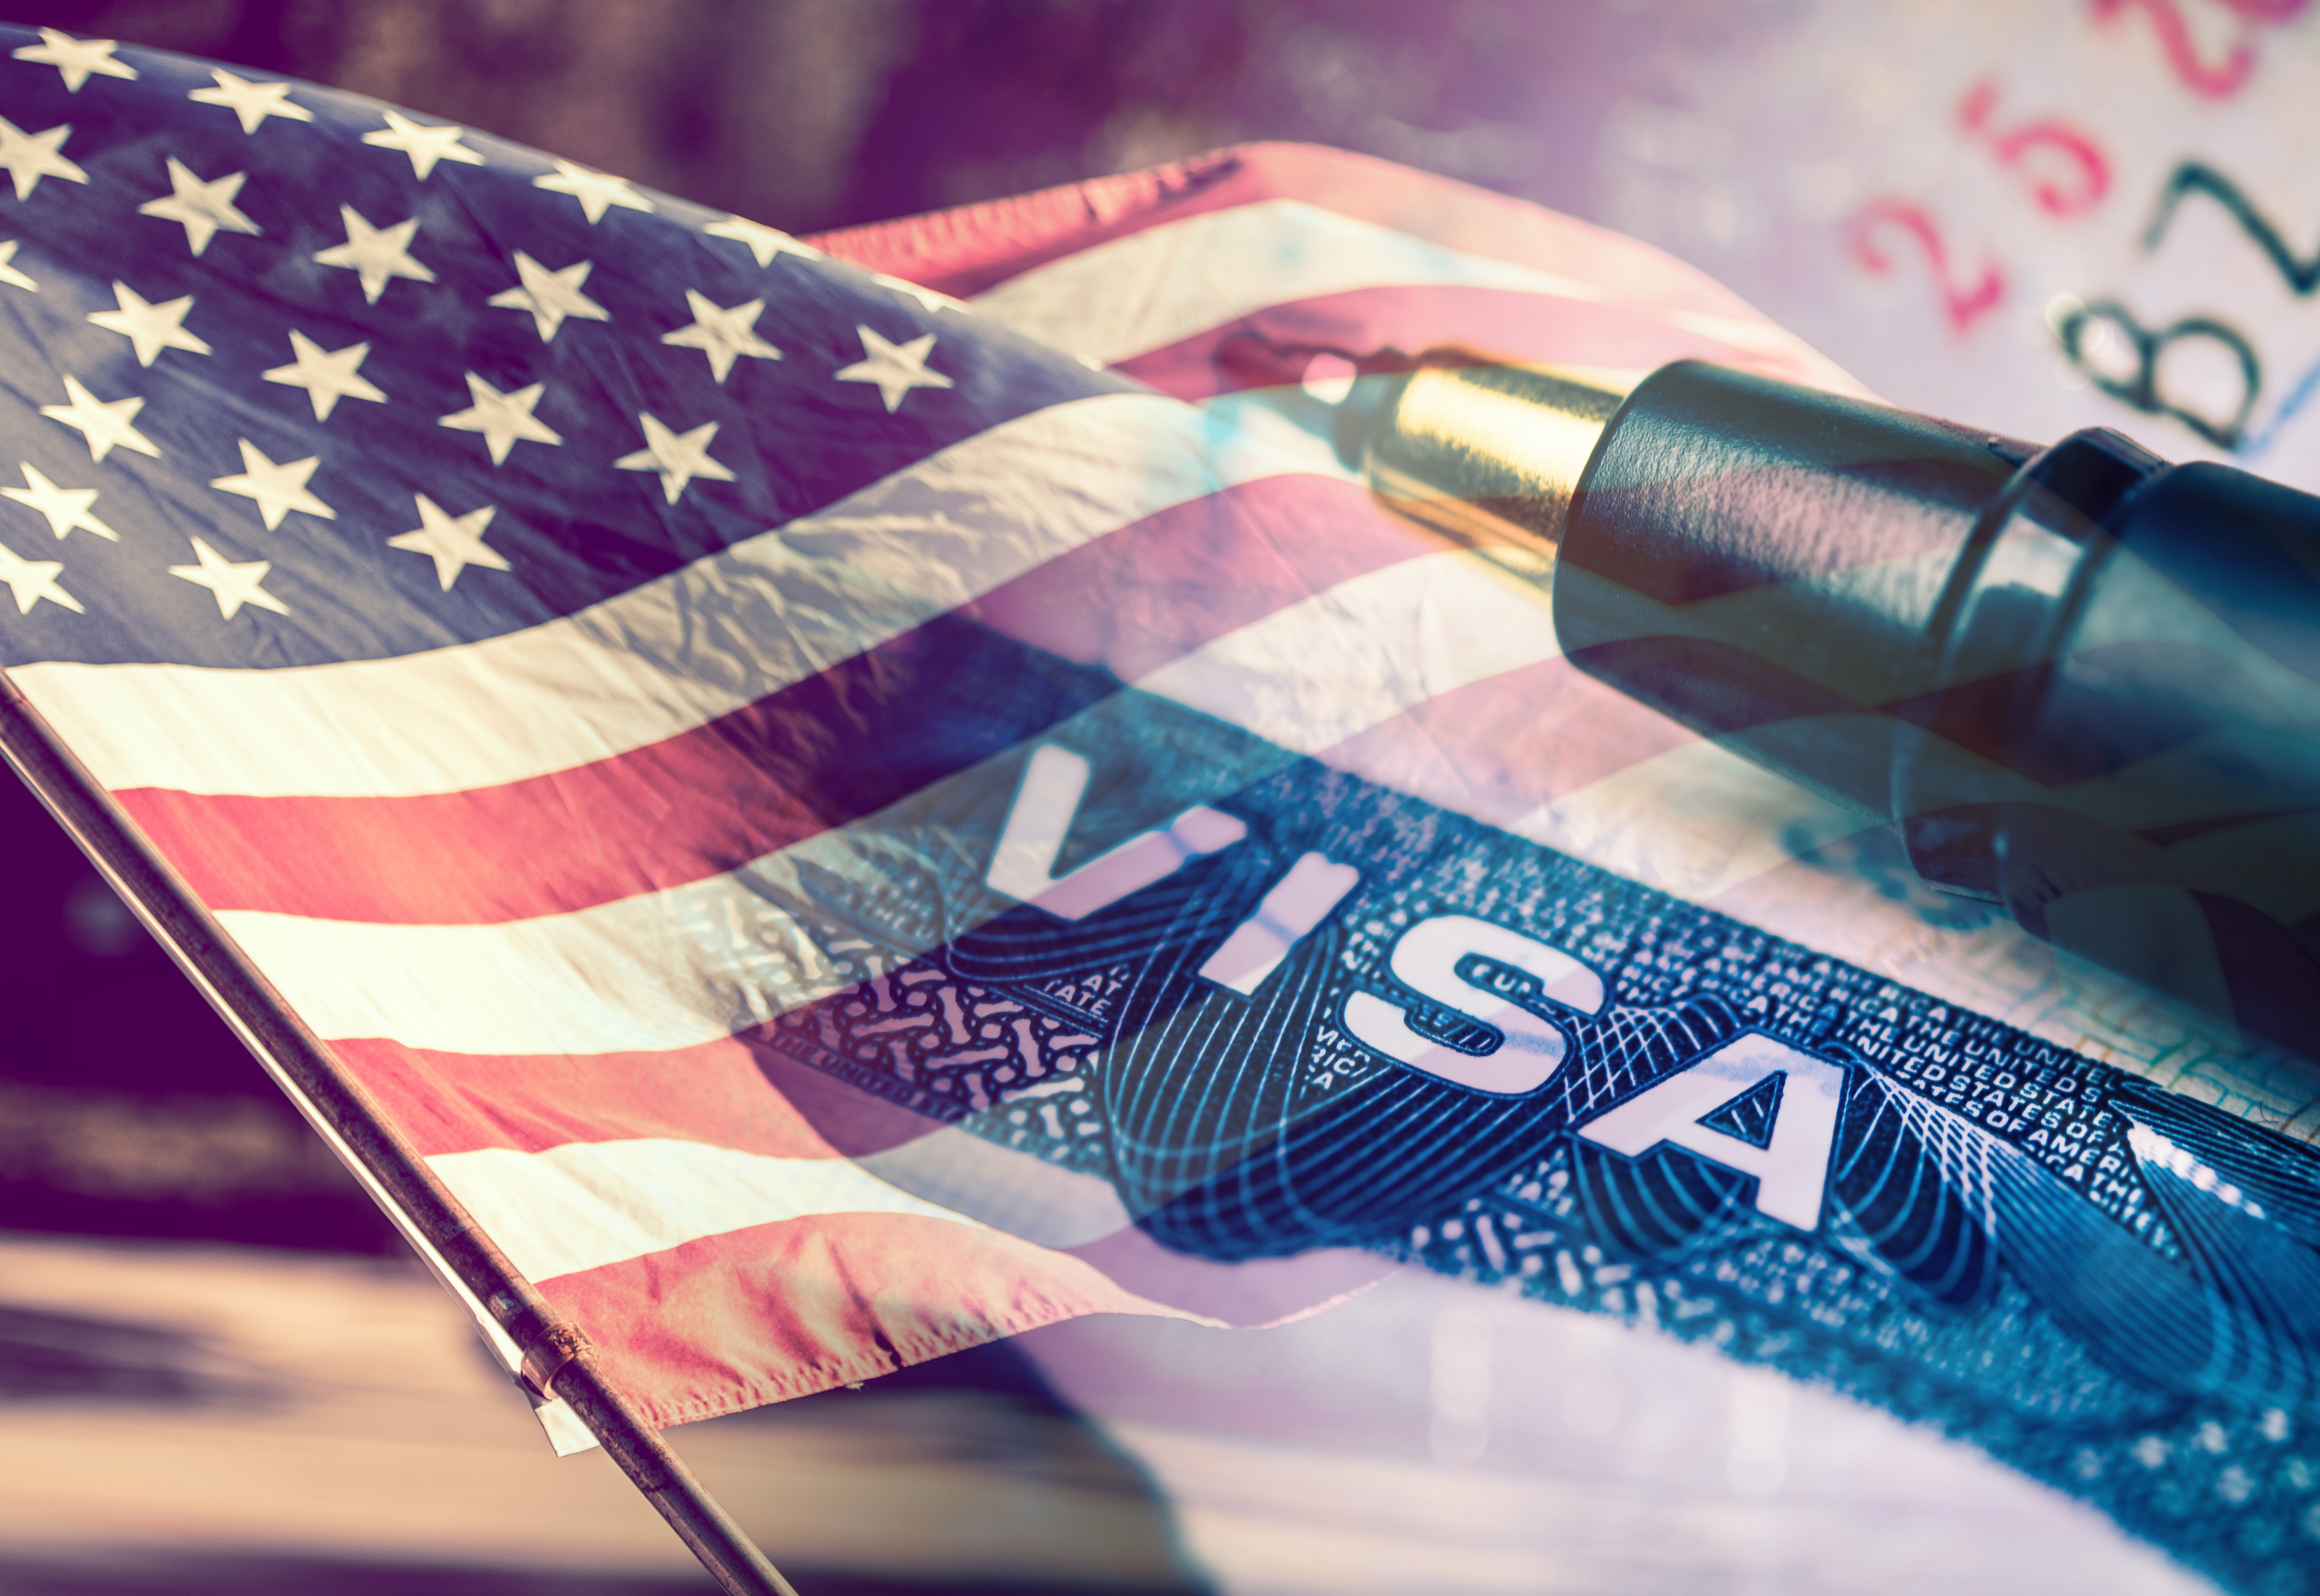 USCIS proposes substantial increases to the EB-5 Investor filing fees